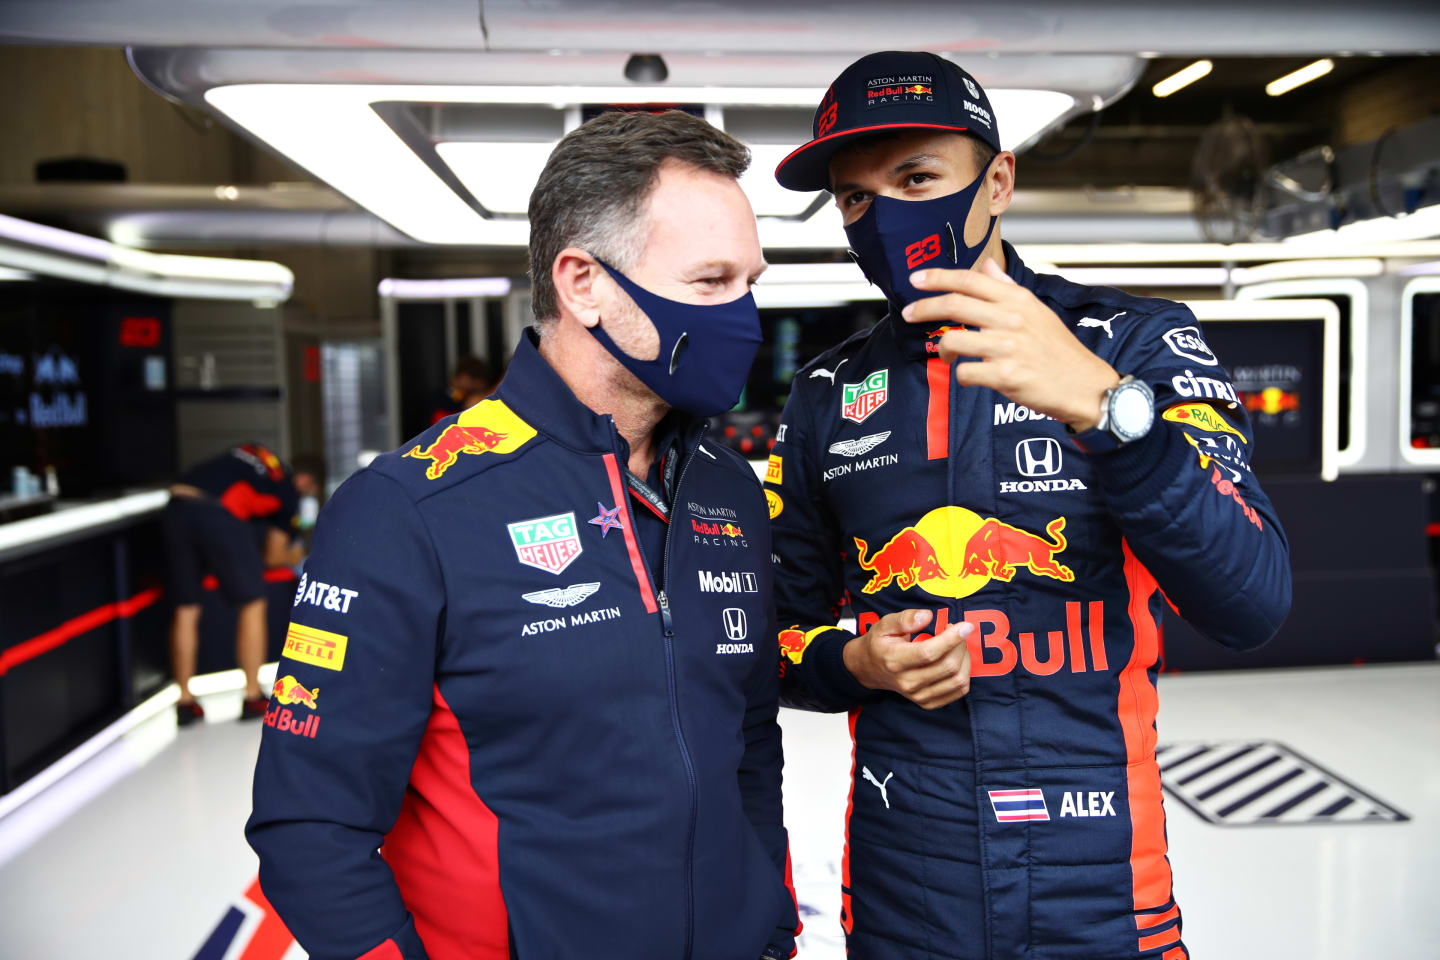 SPA, BELGIUM - AUGUST 29: Red Bull Racing Team Principal Christian Horner speaks with Alexander Albon of Thailand and Red Bull Racing in the garage during qualifying for the F1 Grand Prix of Belgium at Circuit de Spa-Francorchamps on August 29, 2020 in Spa, Belgium. (Photo by Mark Thompson/Getty Images)